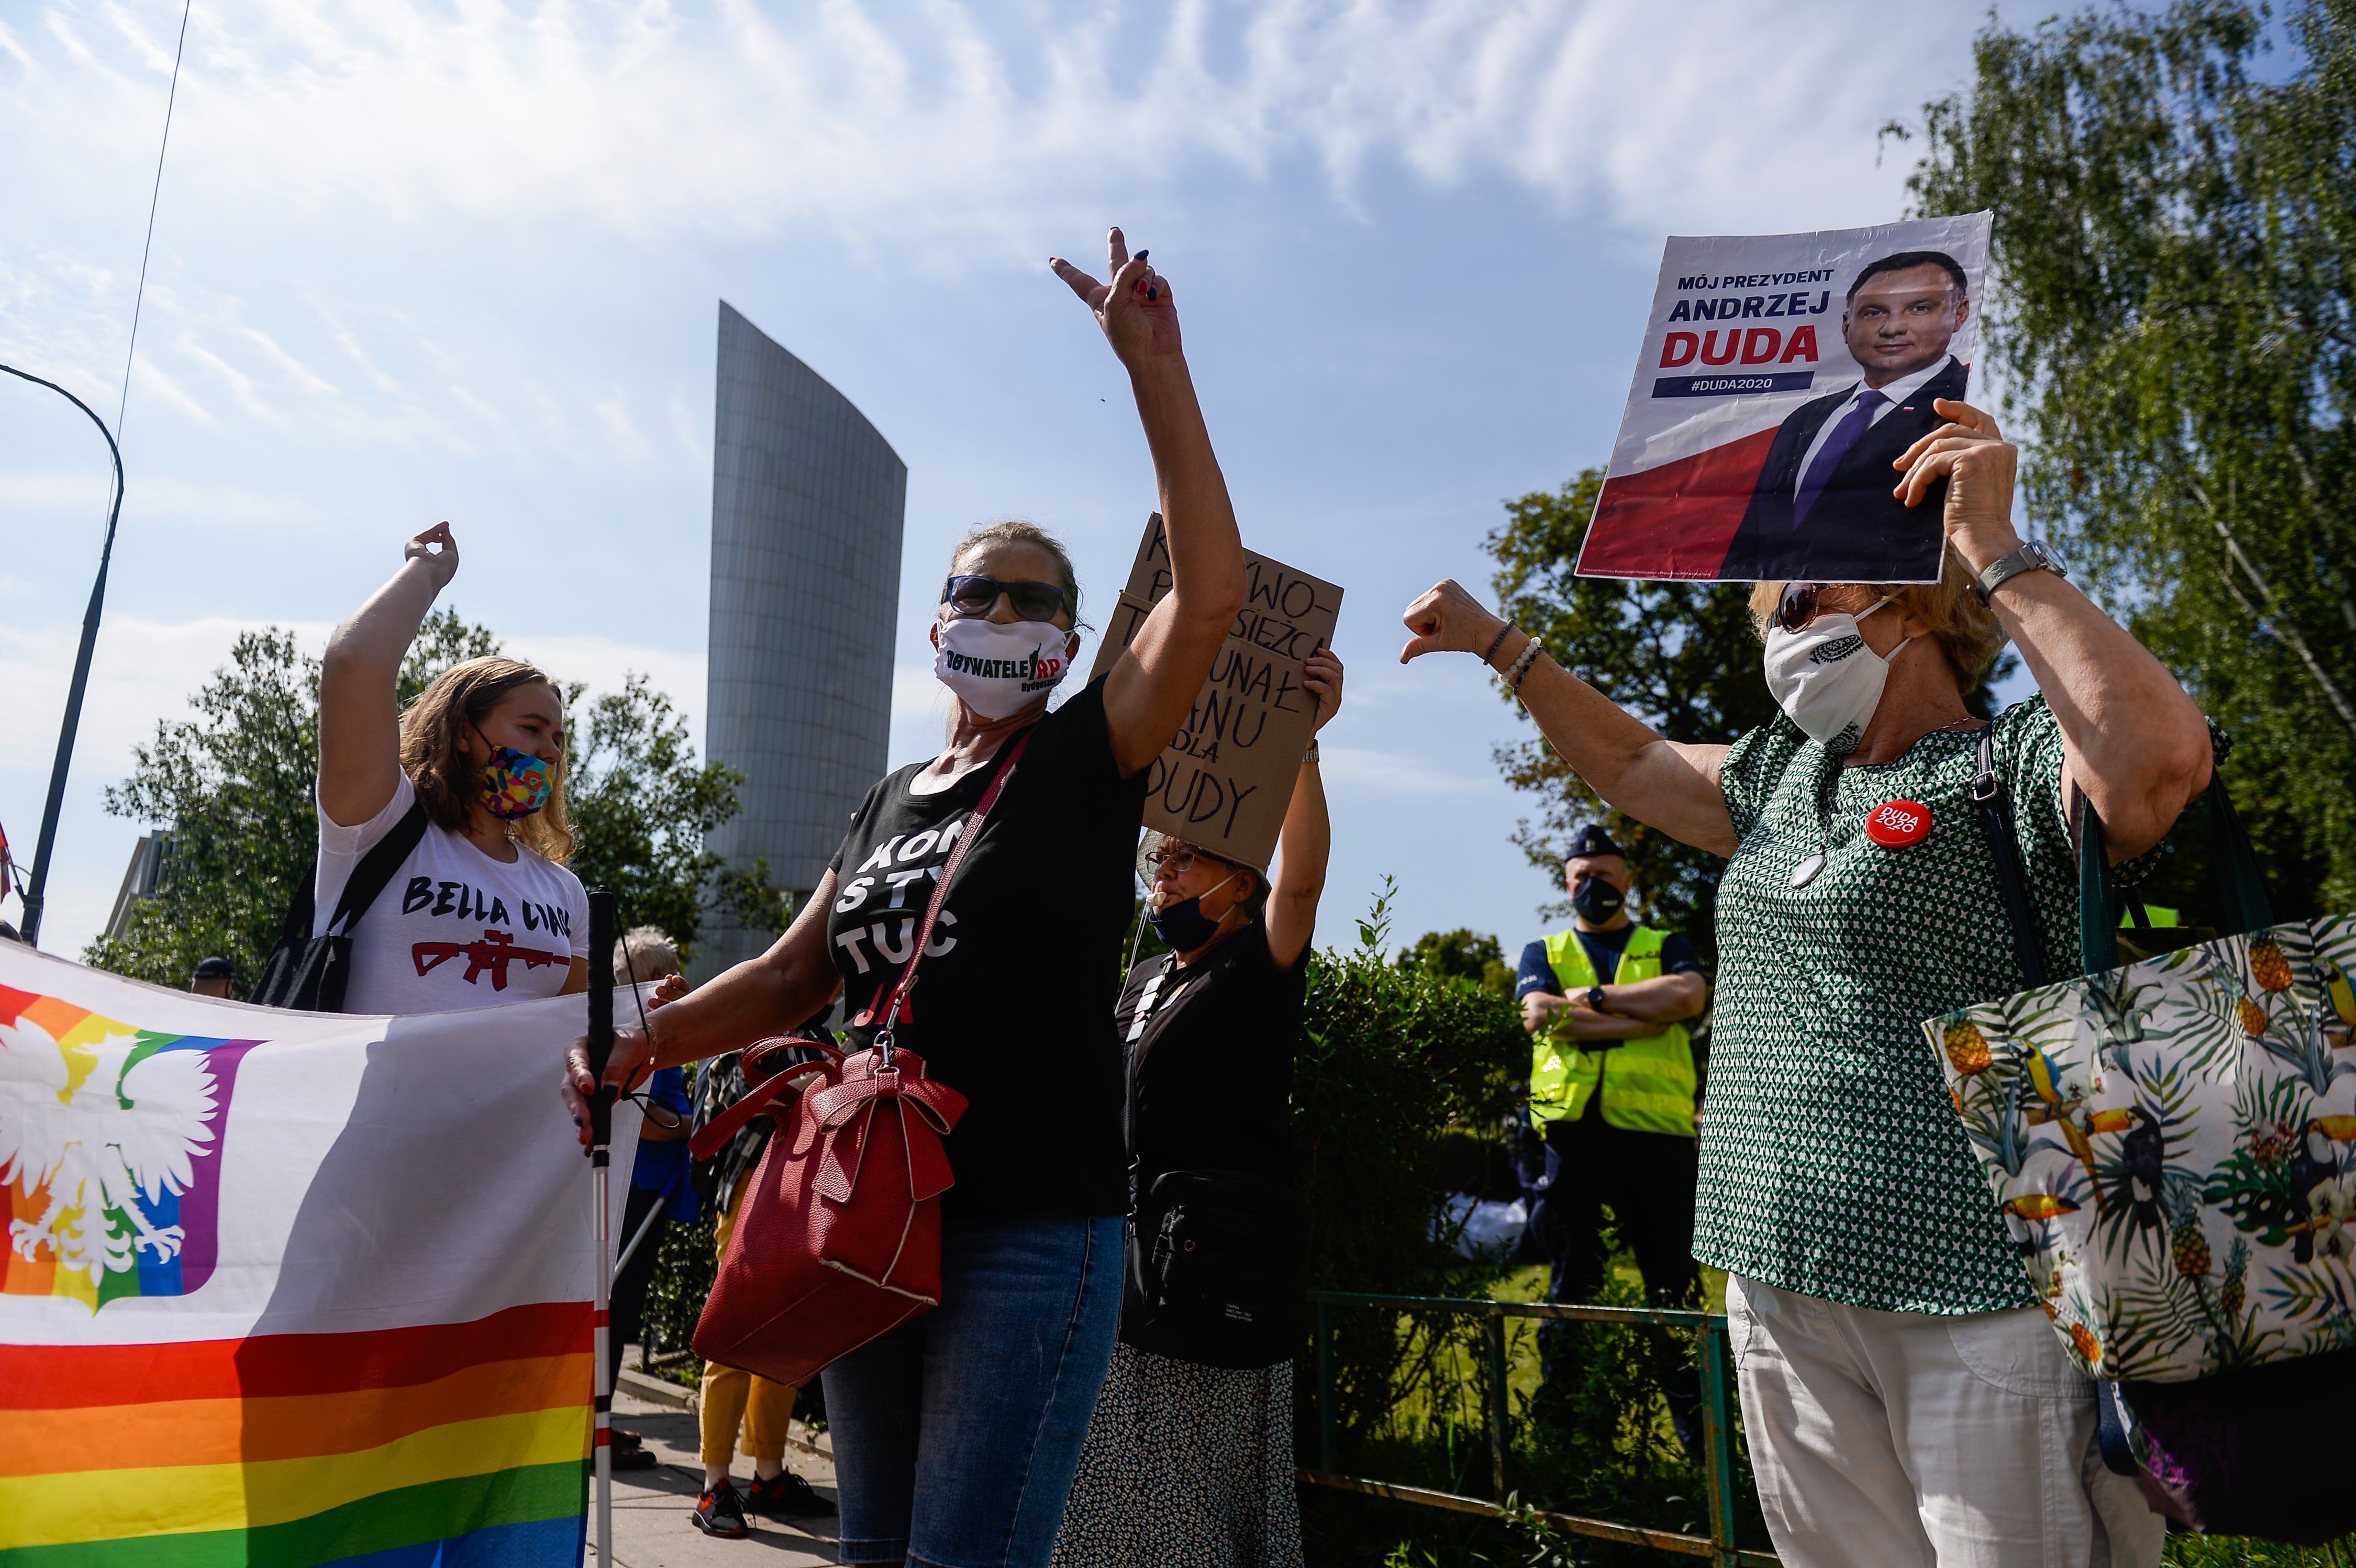 Growing hostility towards the LGBT+ community in Poland has driven a wave of protests from both sides, including in Warsaw last August